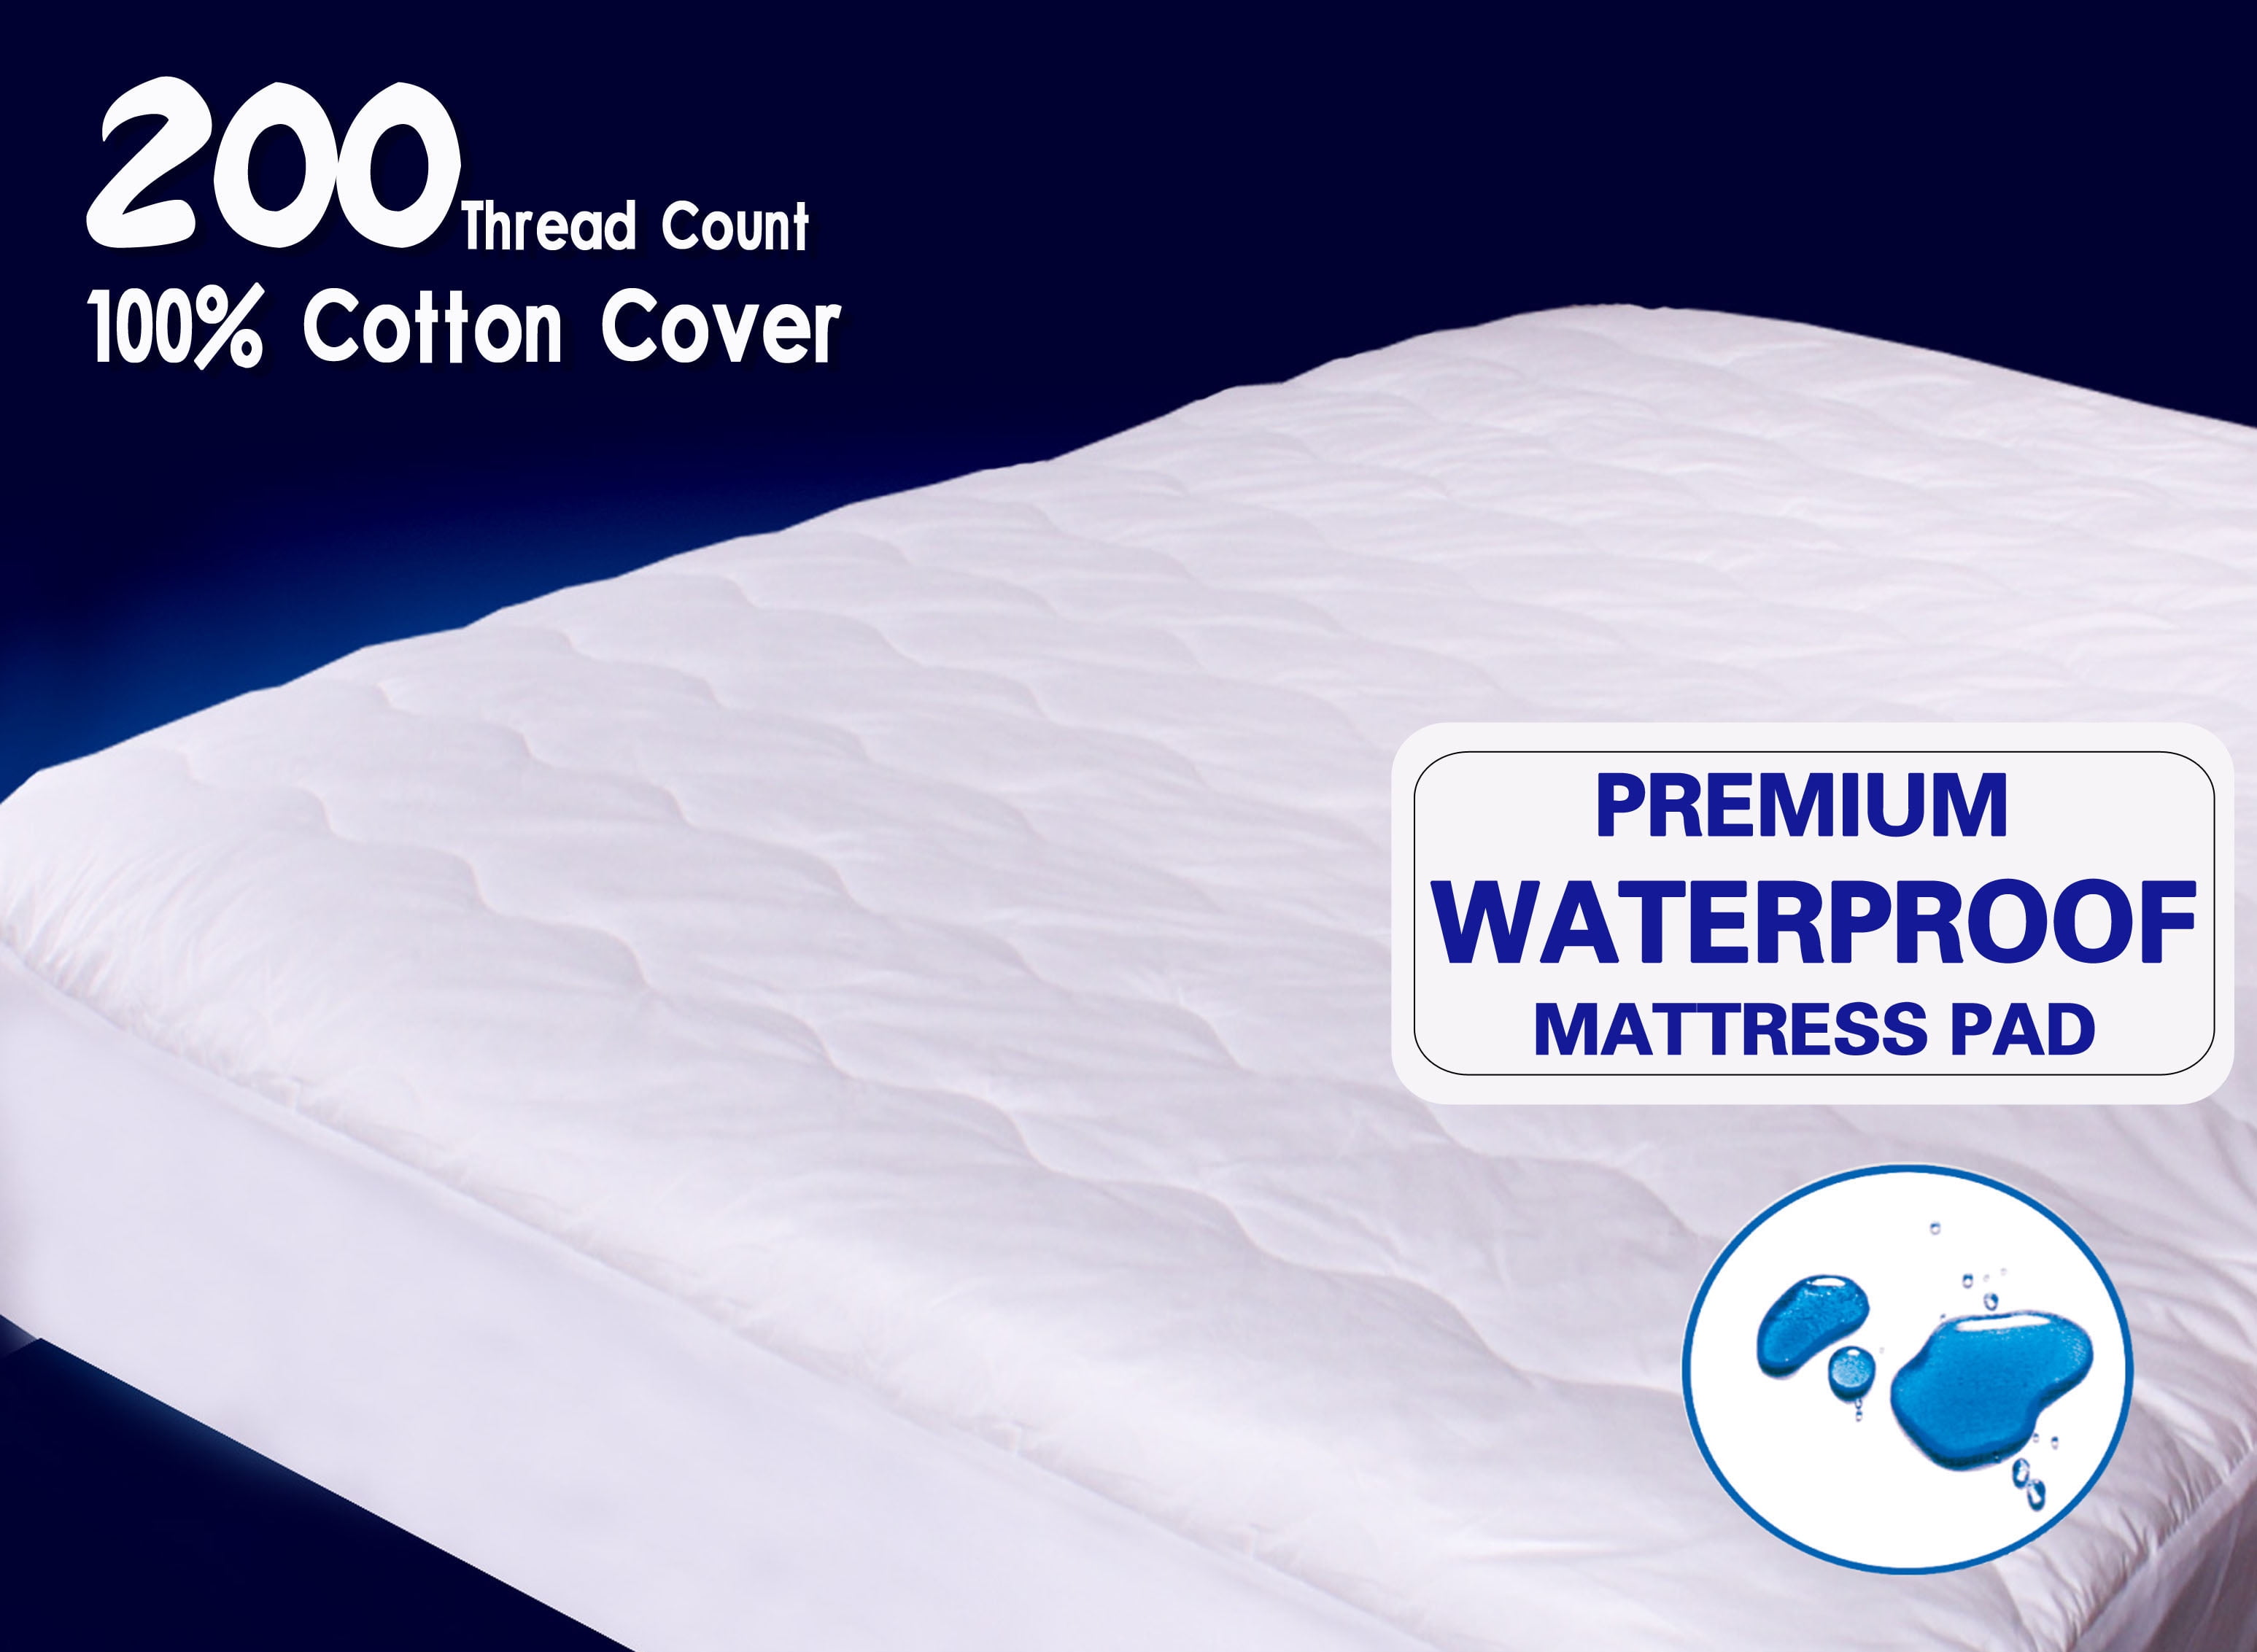 SLEEP OPTIONS Deluxe Twin-Size Quilted Waterproof Mattress Pad and Protector  MP0002-1110 - The Home Depot